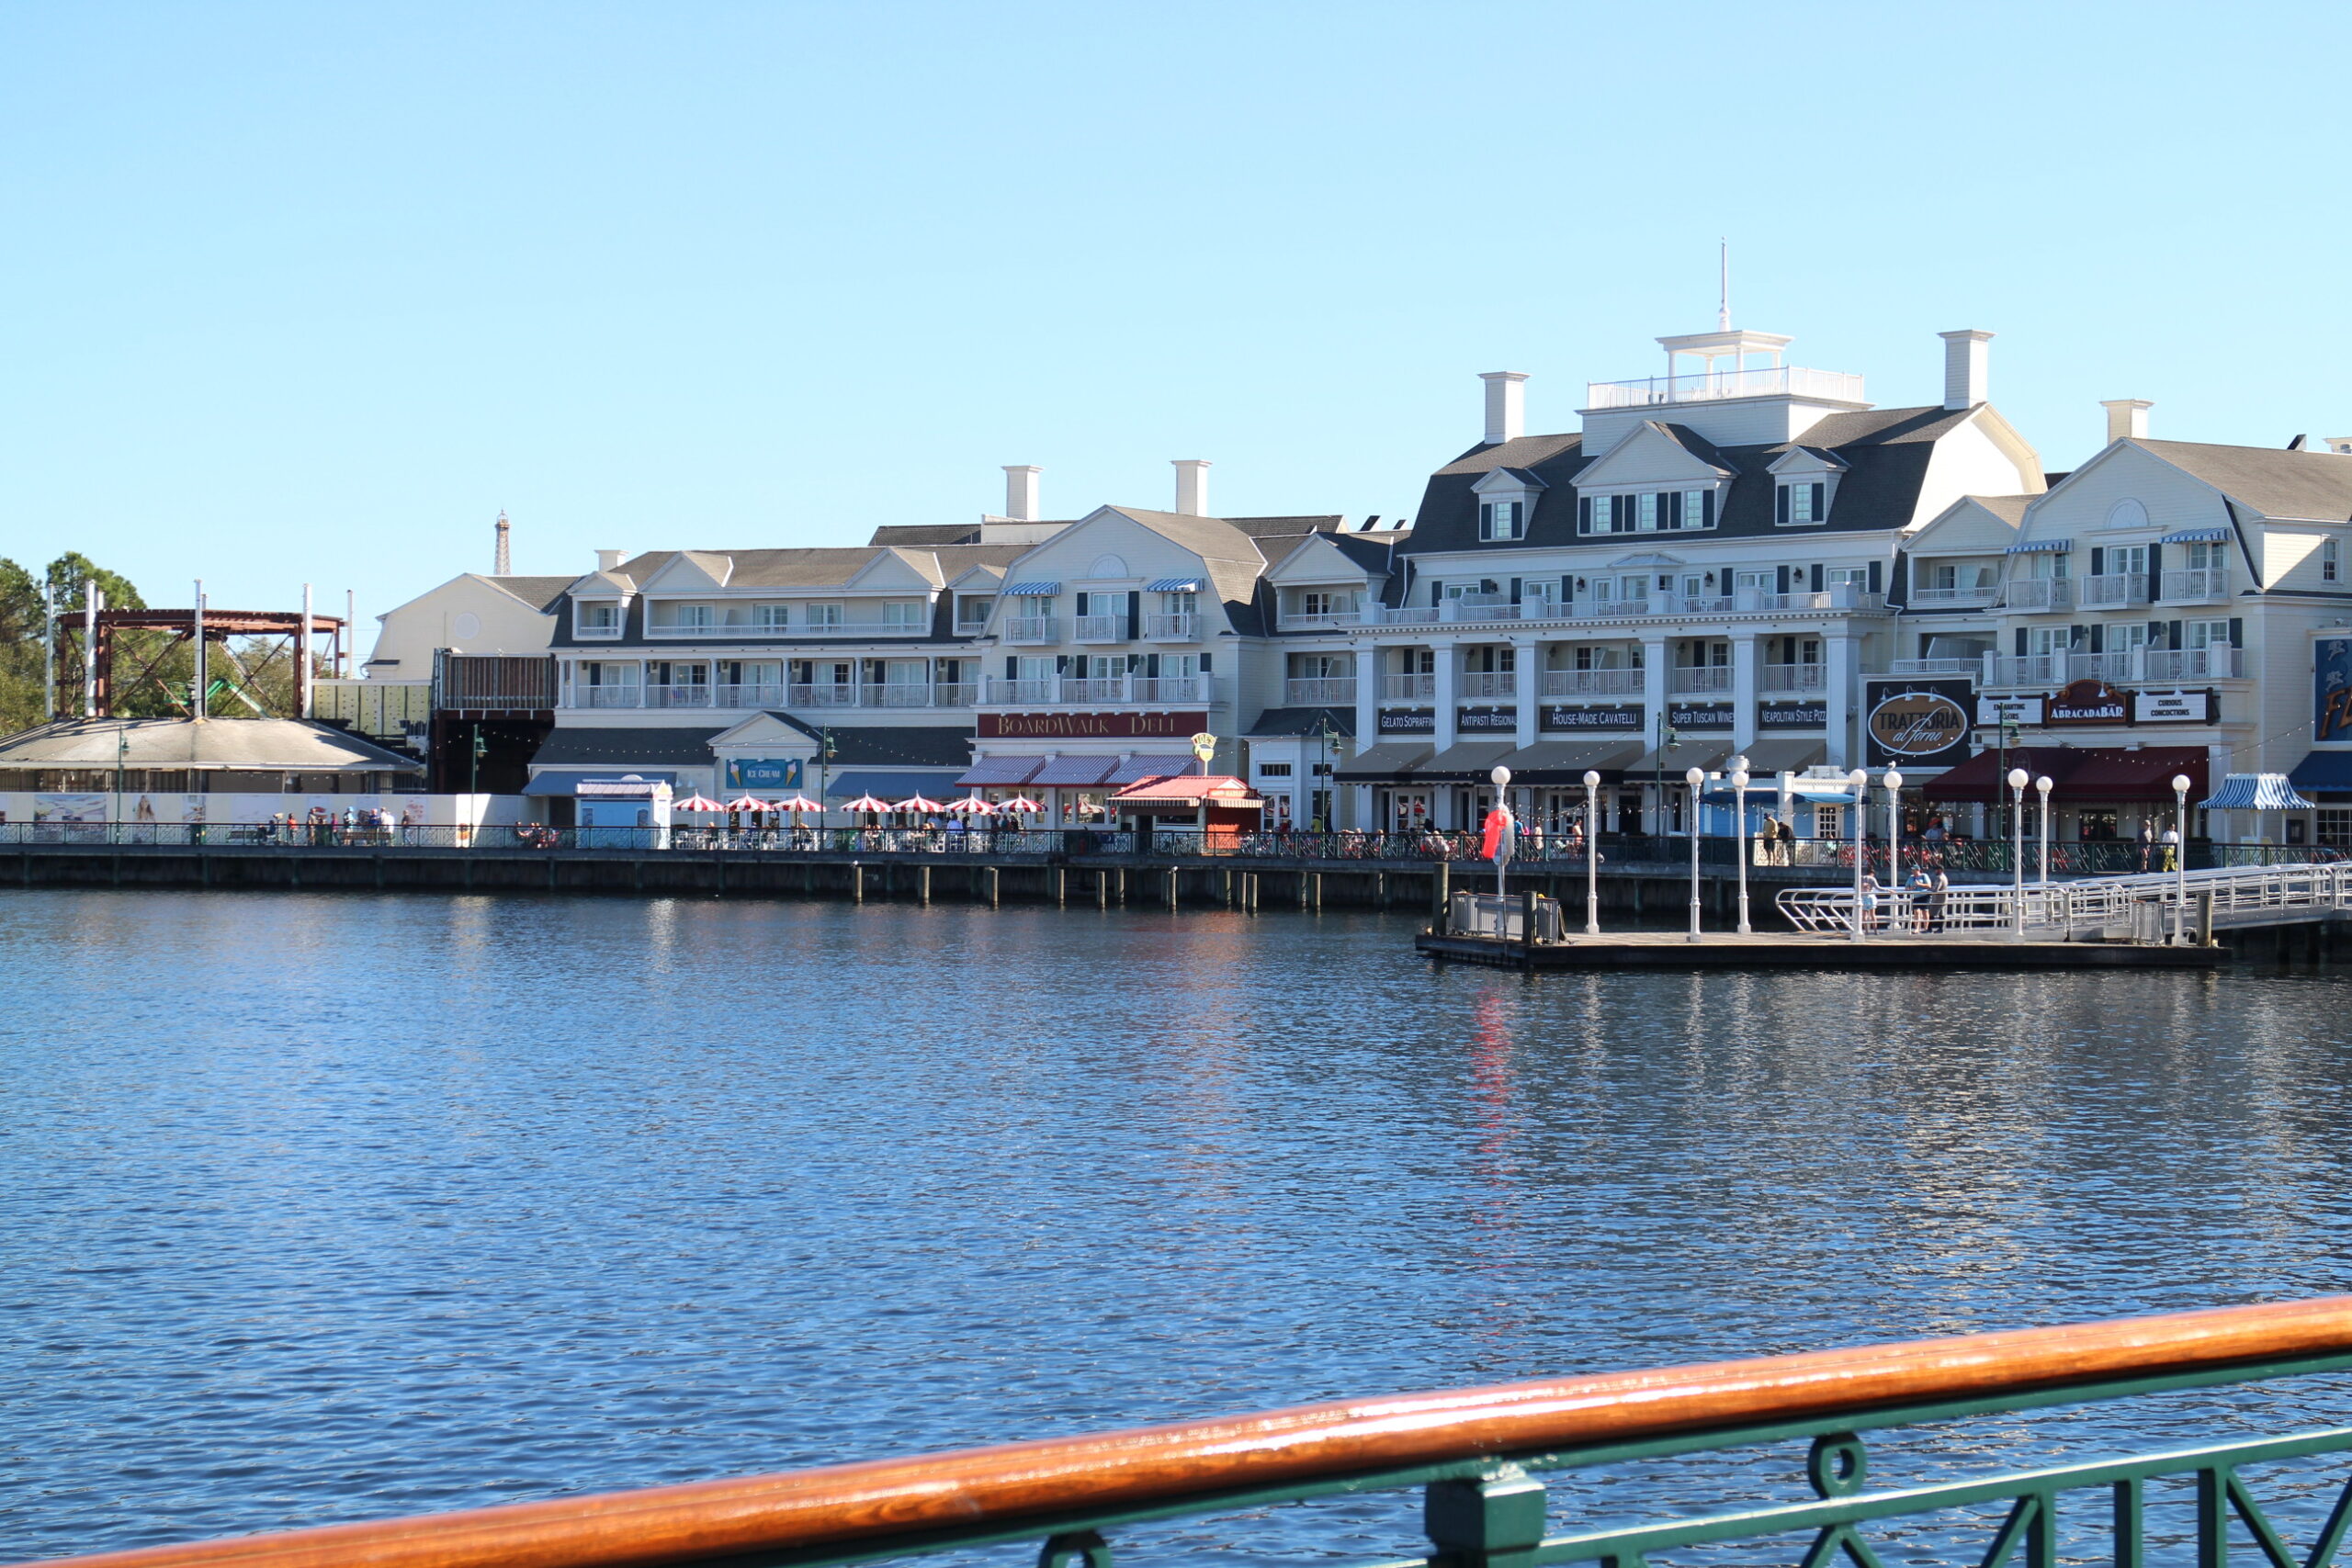 Disney's BoardWalk Resort sits over a day time lake view